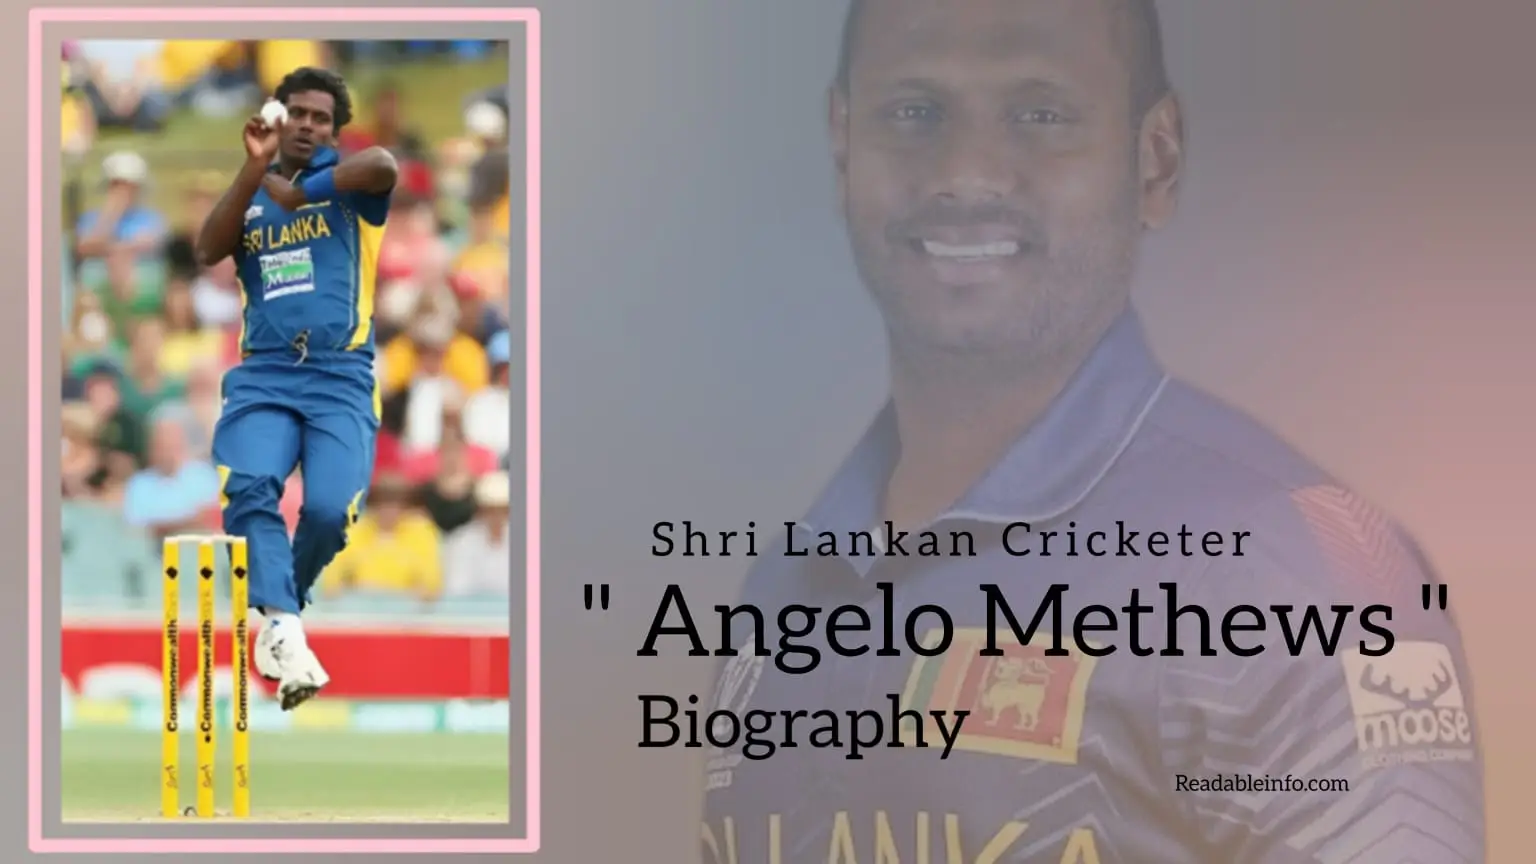 You are currently viewing Angelo Mathews Biography (Shri Lankan Cricketer)